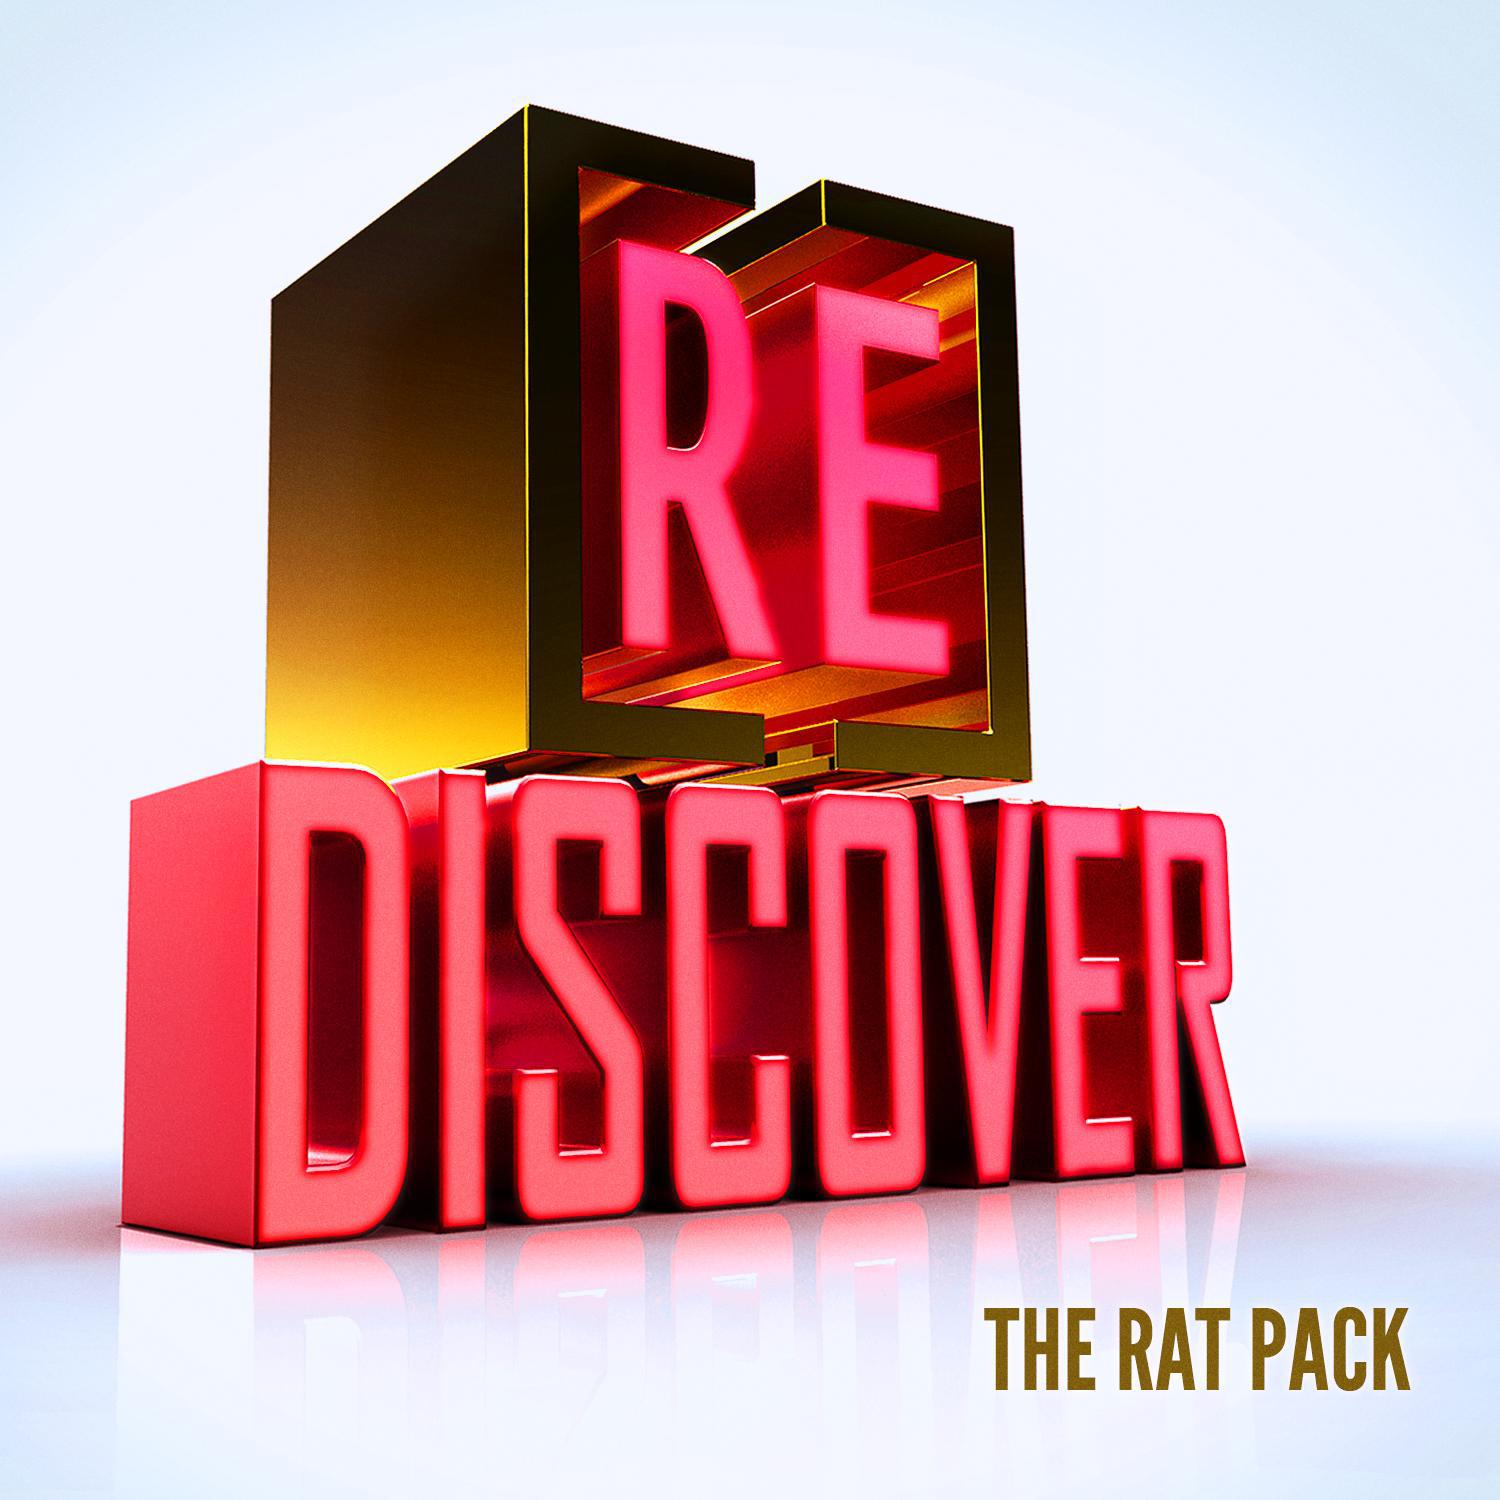 [RE]discover The Rat Pack